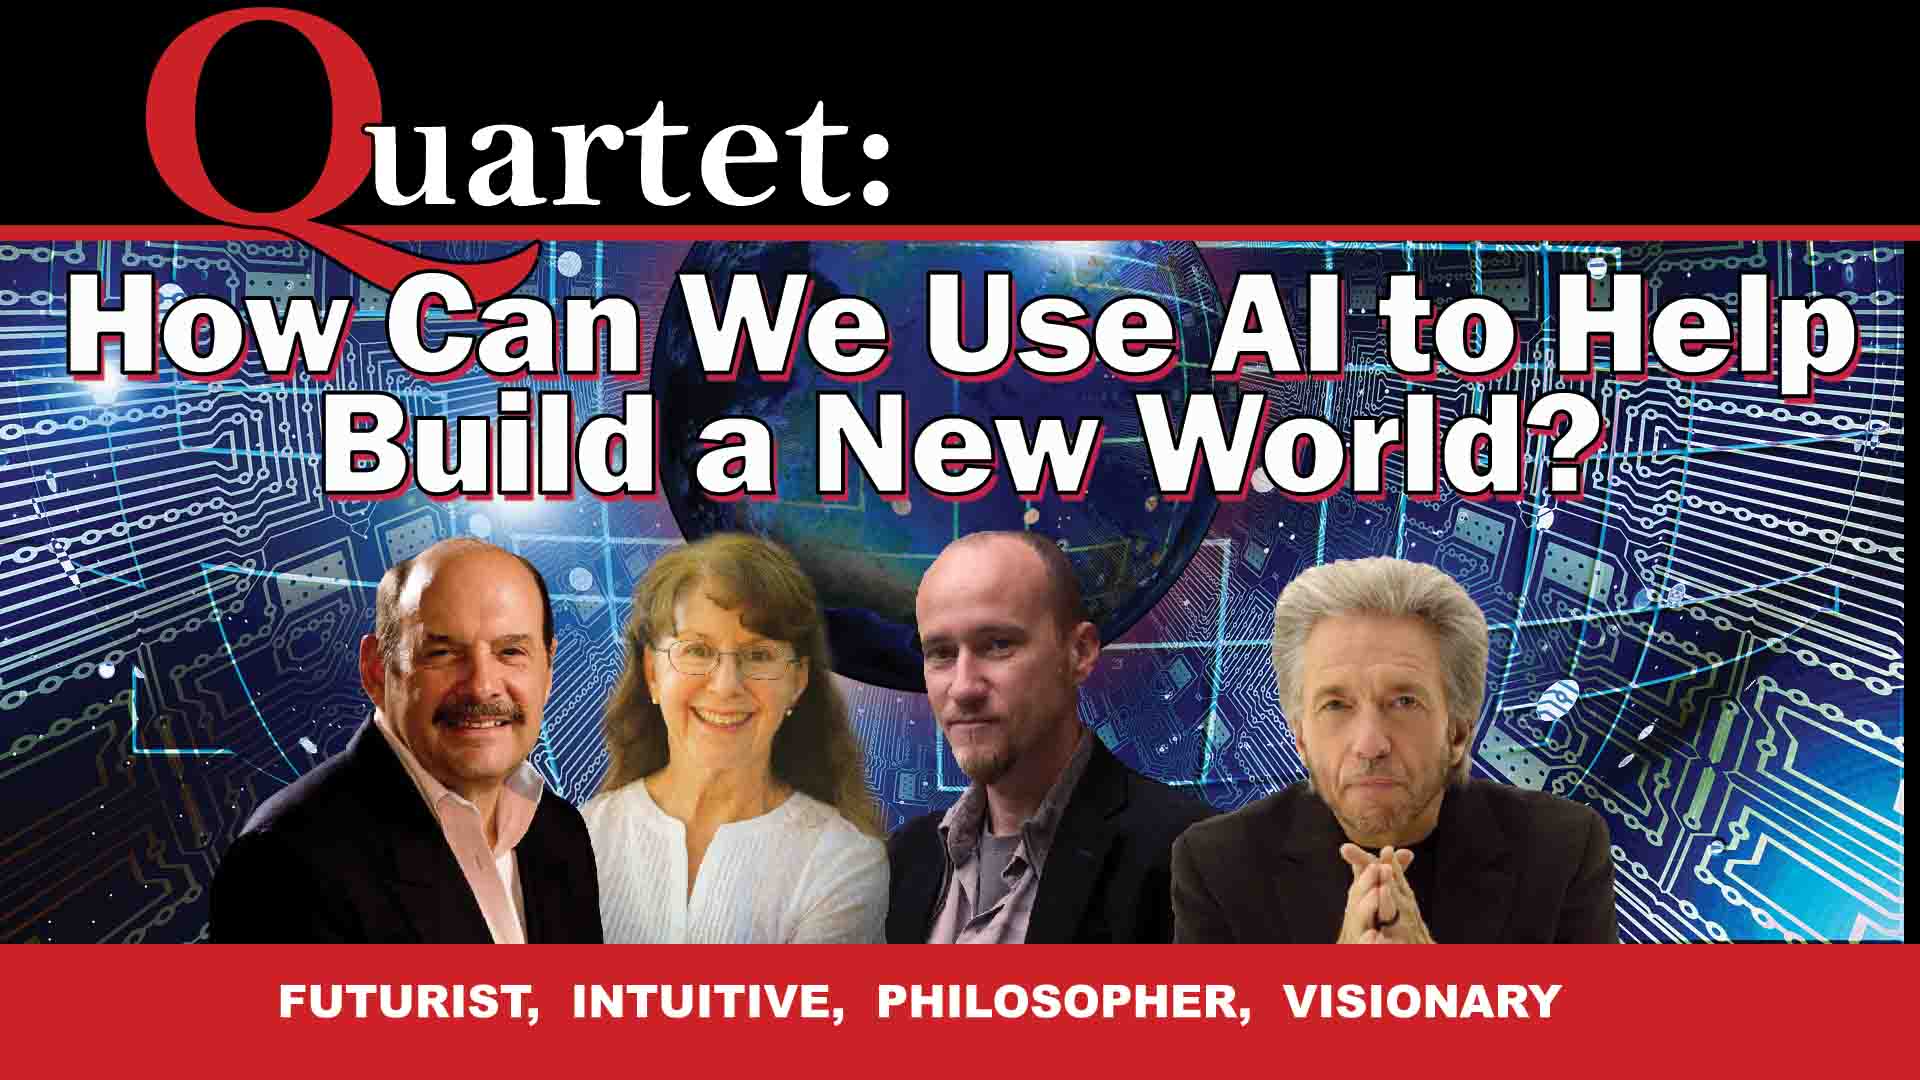 Quartet Premium - How can we use AI to help build a new world?